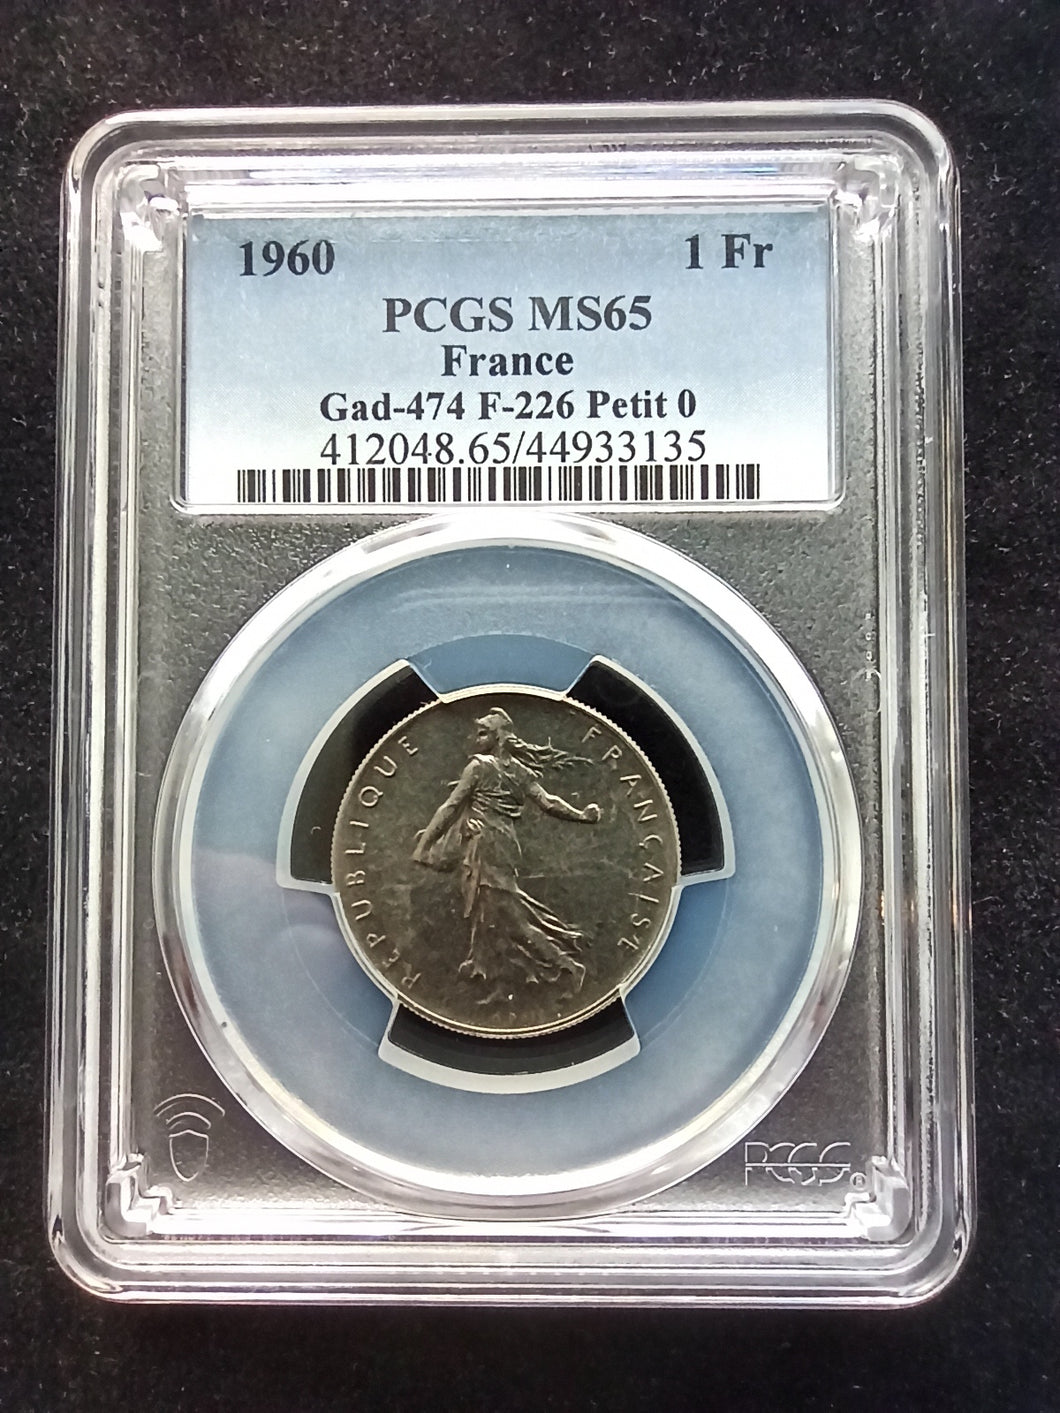 France : 1 Franc Semeuse 1960 First Issue ; PCGS MS 65